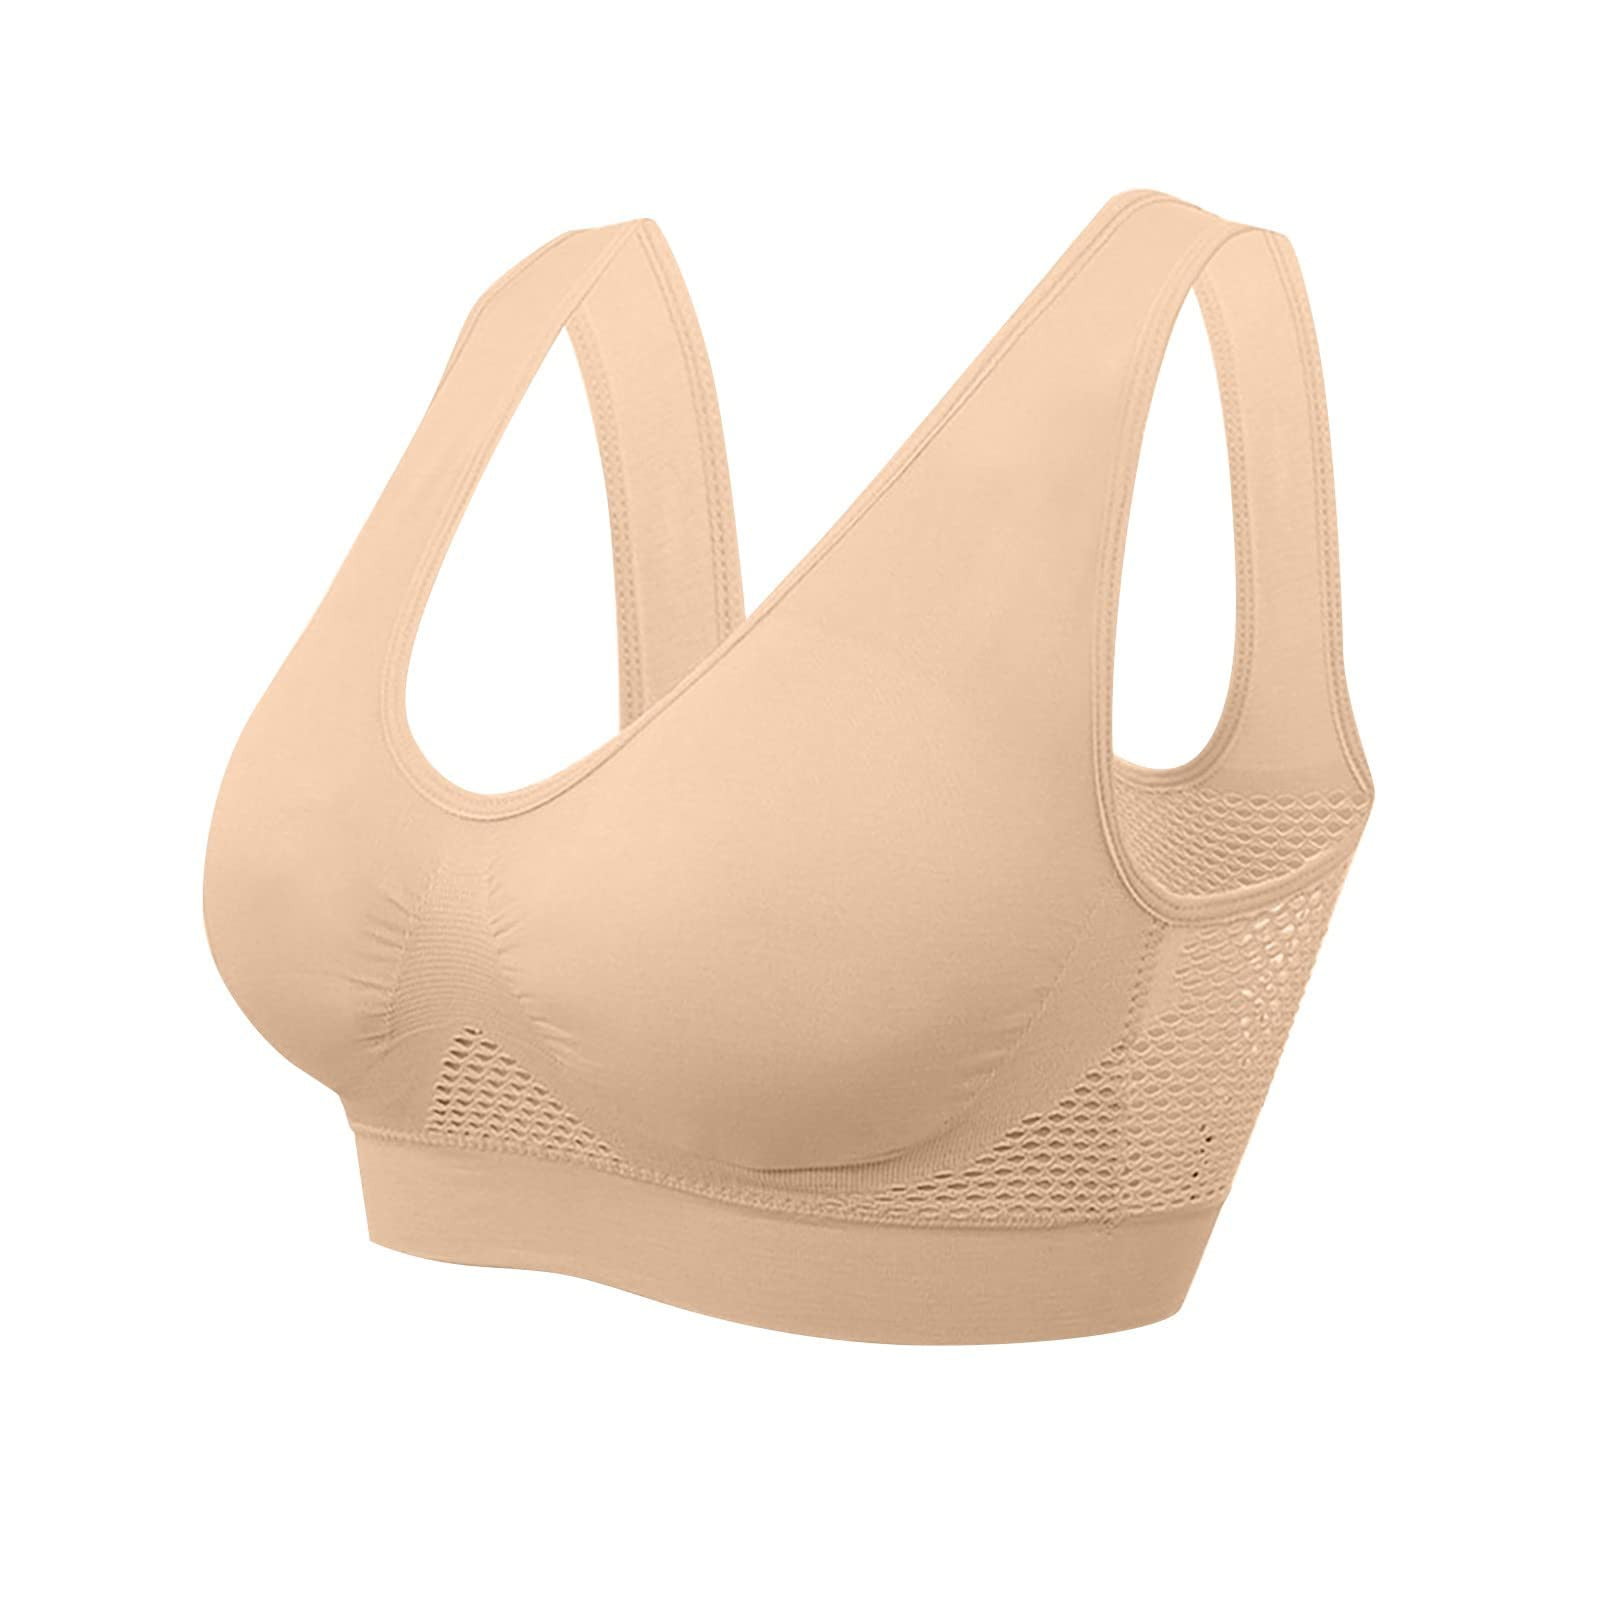 Sksloeg Womens Bras No Underwire Lace Mesh V-Neck Bra, Front Closure  Posture Correct 3/4 Cup Bras Plus Size Back Support Bras for Women,Beige  X-Large 